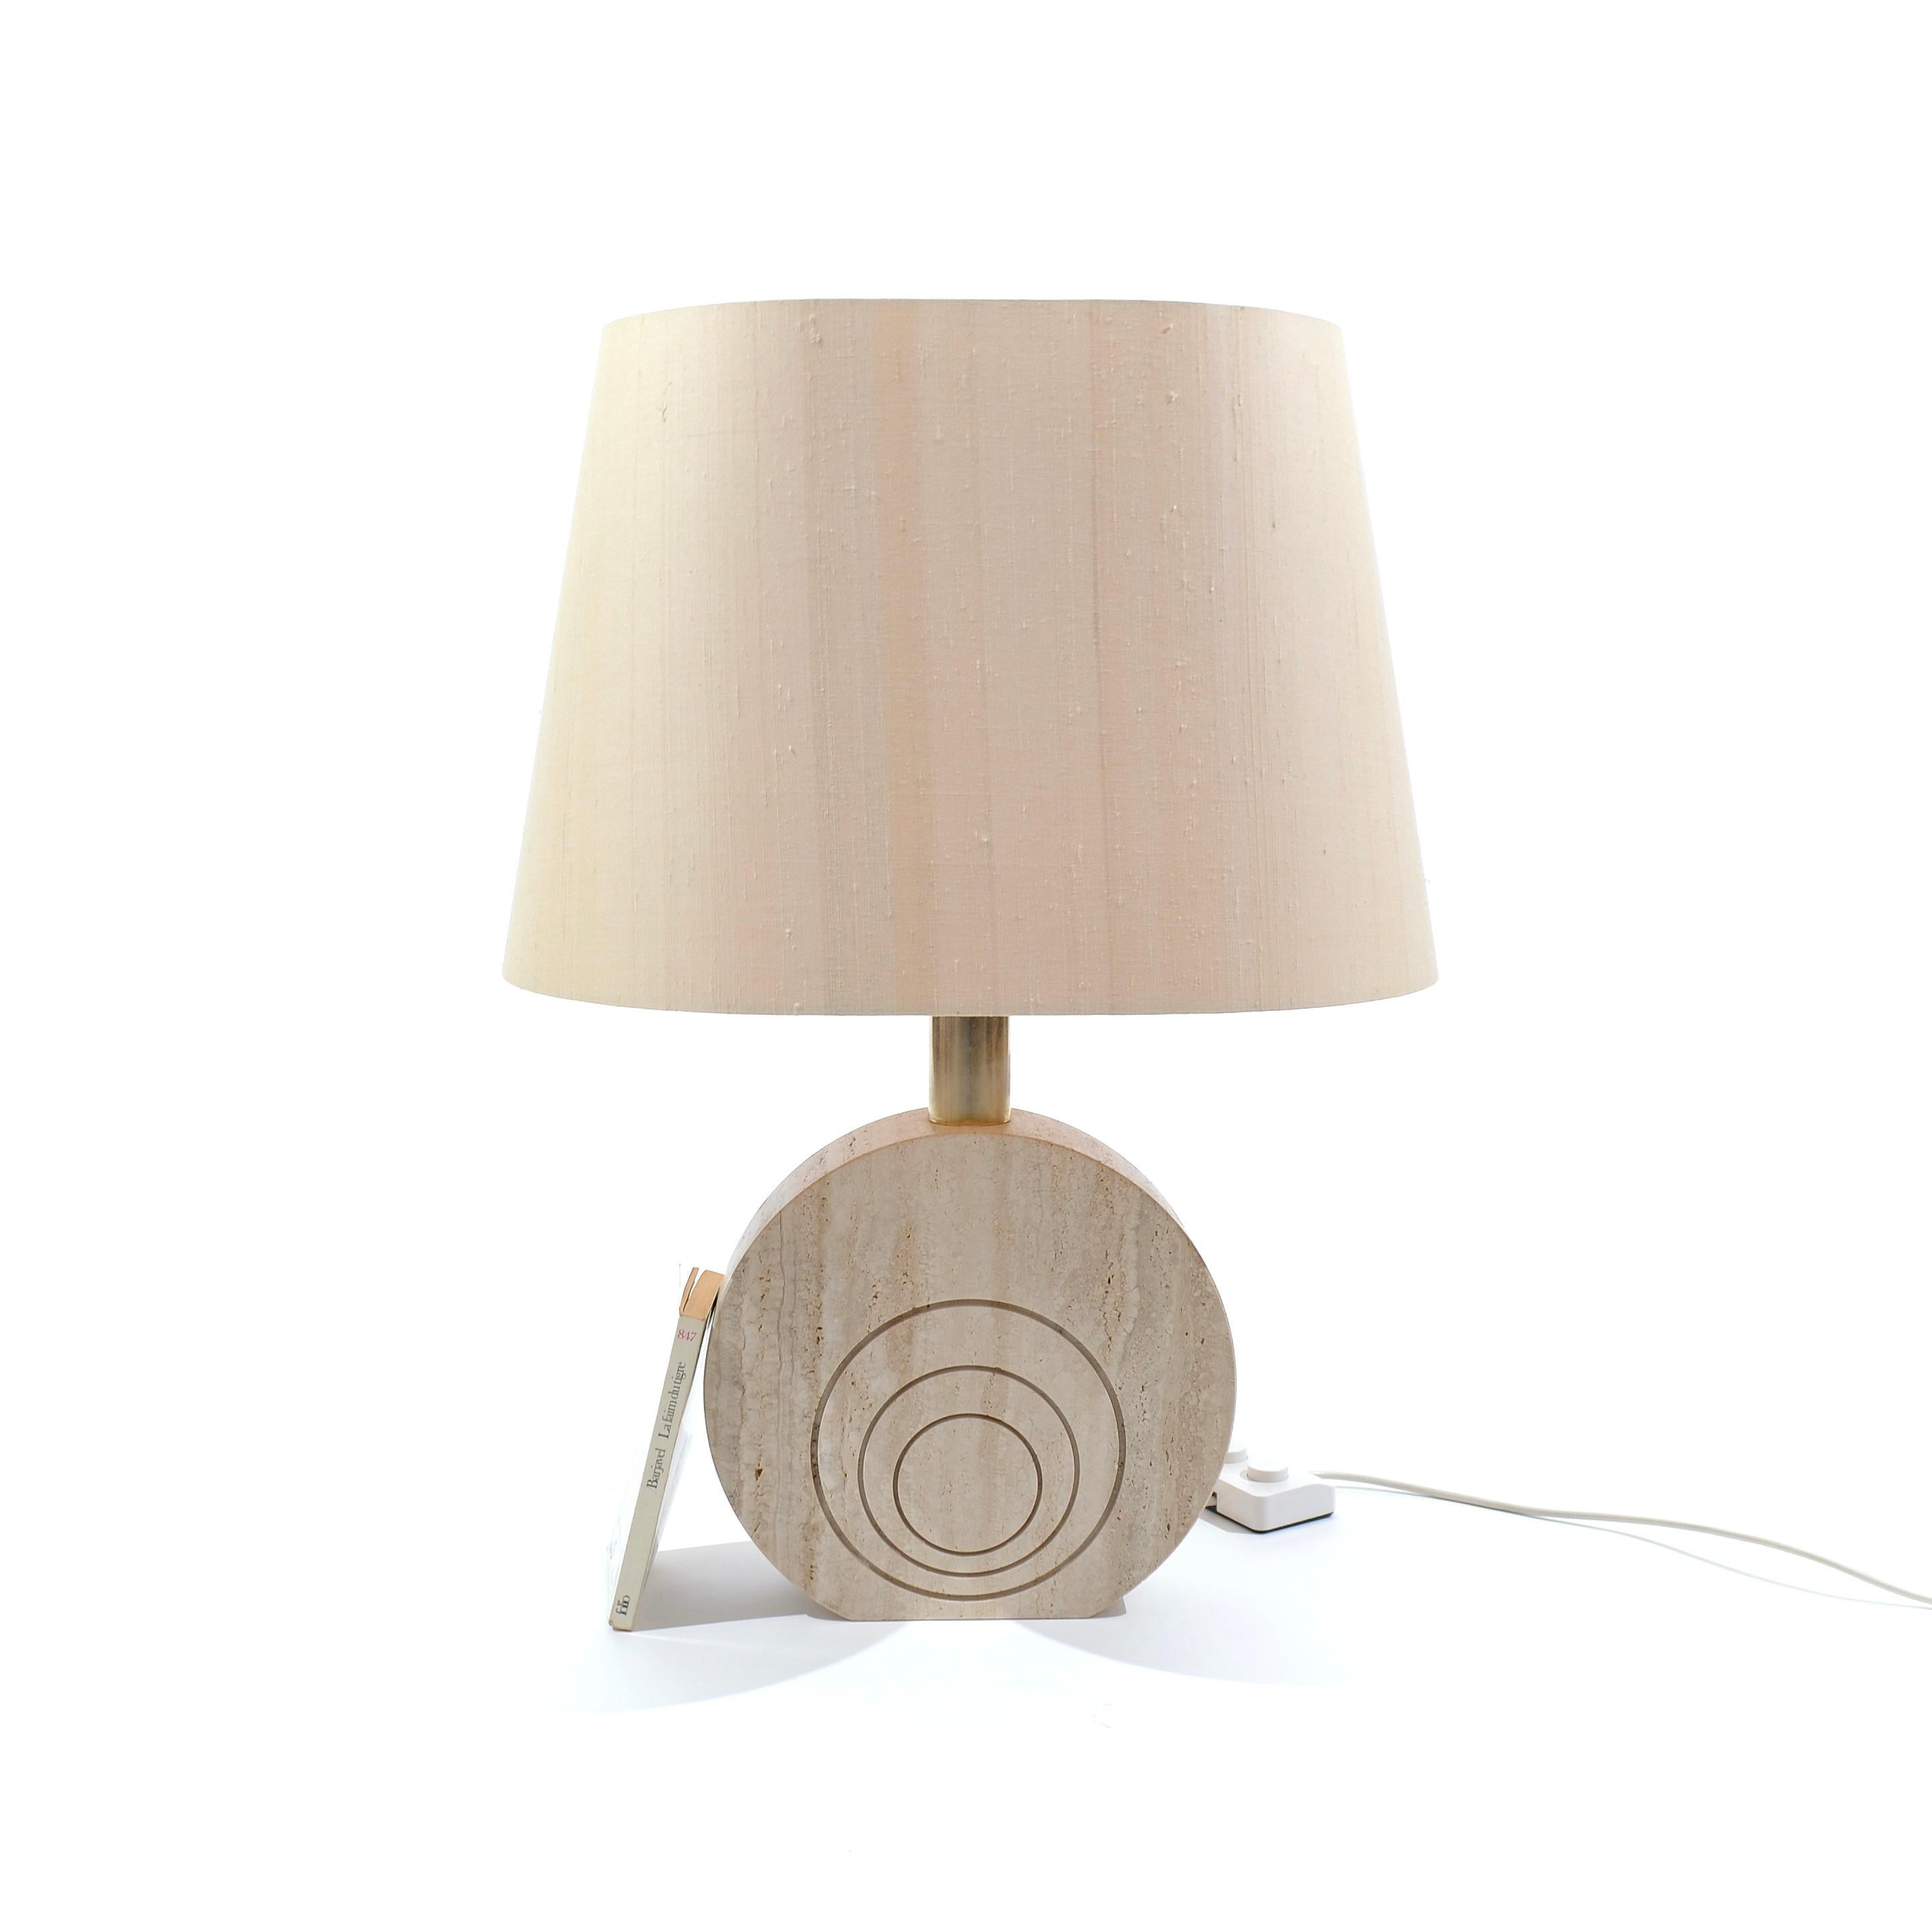 A thick disc of travertine, topped by a brass cylinder supporting a large cotton lampshade.

This shows all the refinement of Italian design. Noble materials used generously in perfect proportions to result in a delicate lamp with natural